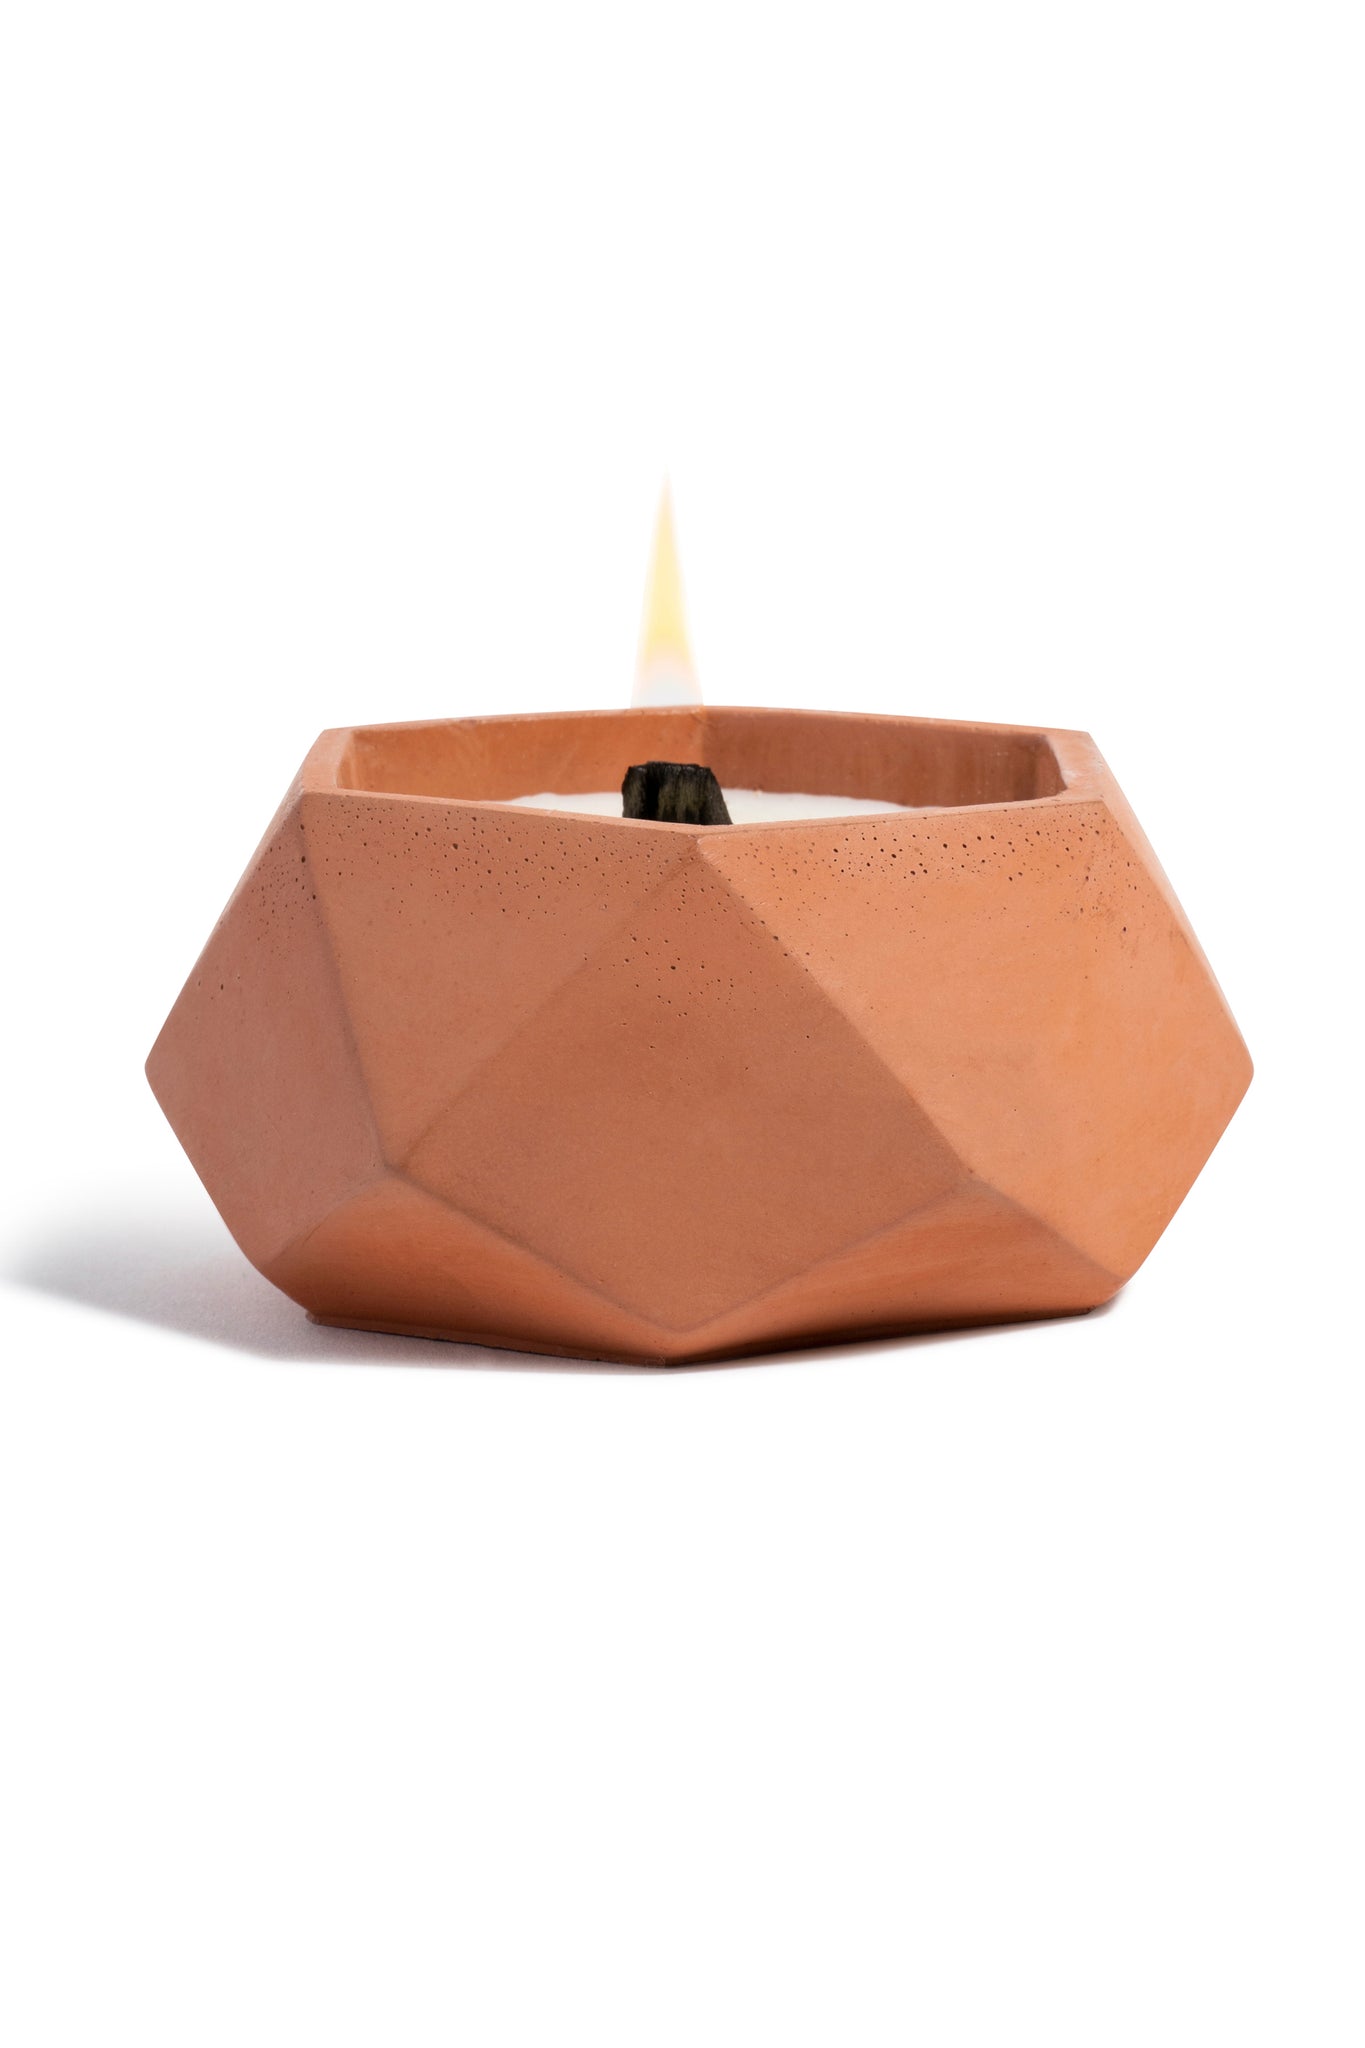 Self Love "Cocoon" 2-in-1 CANDLE + PLANTER/HERB BURNER